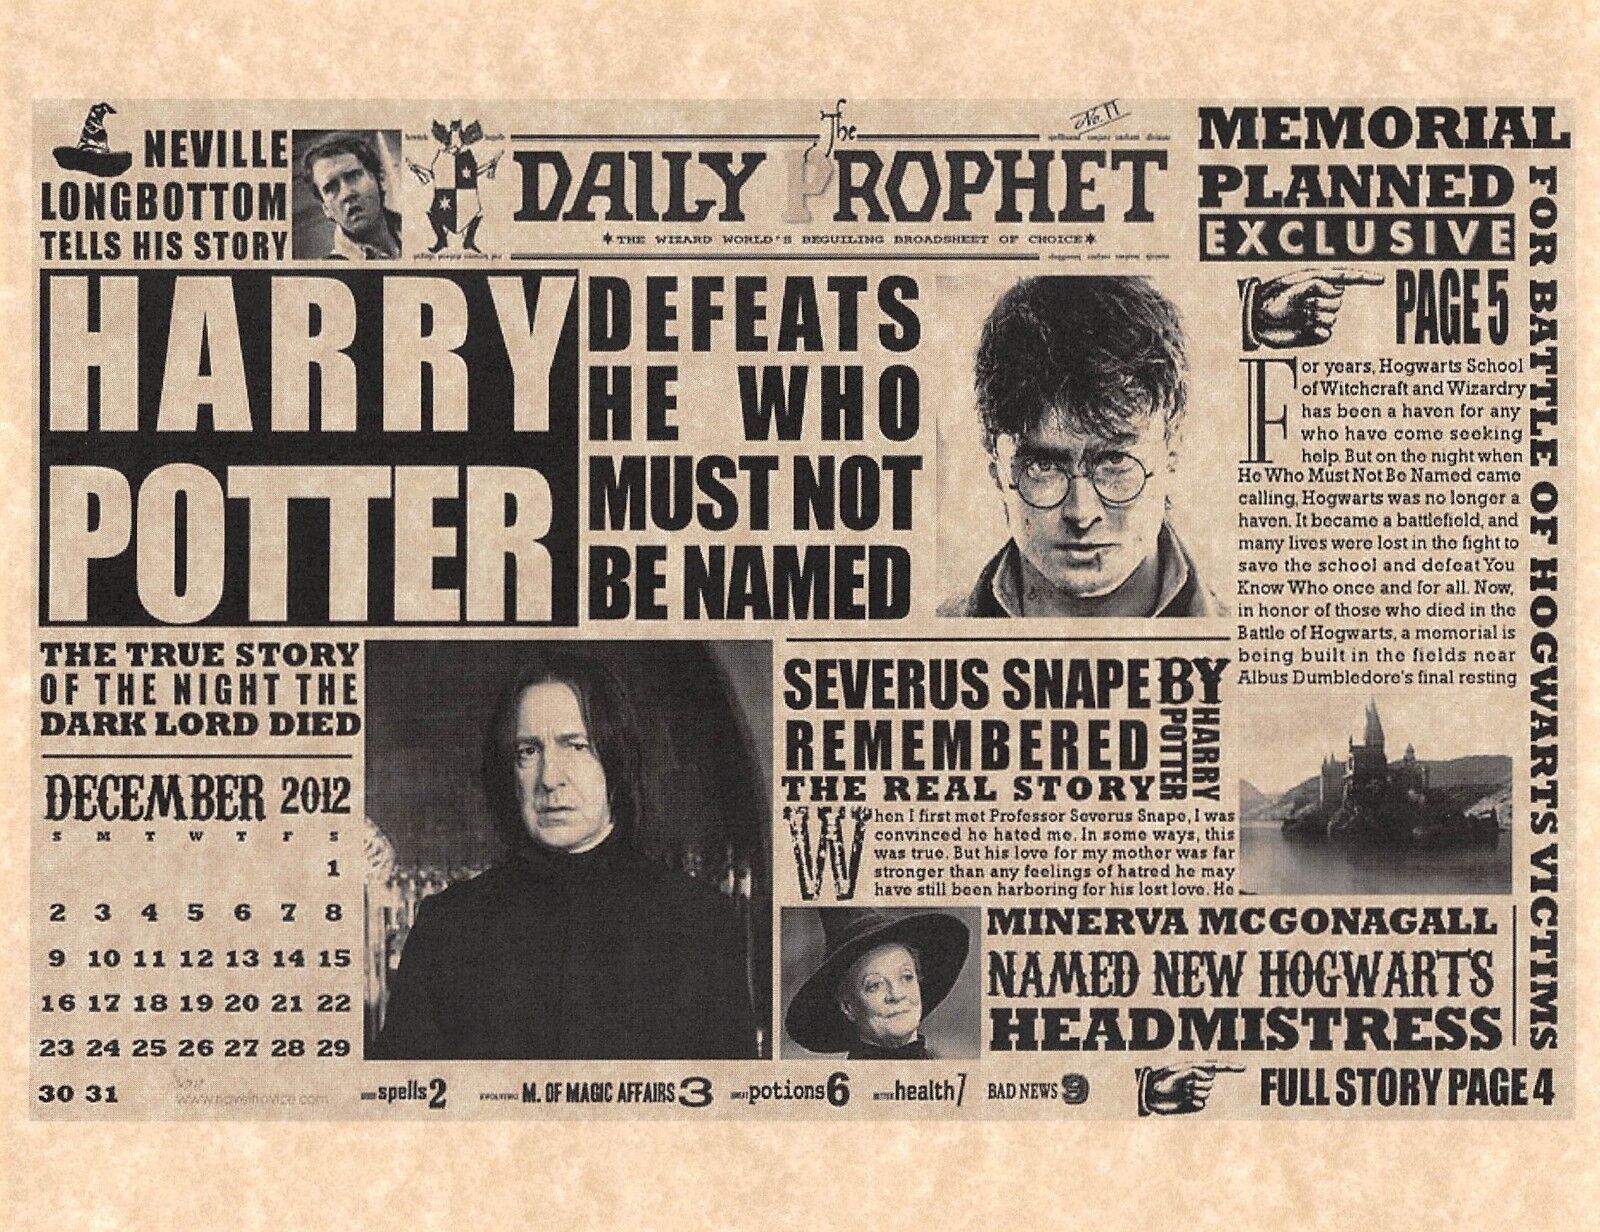 Daily Prophet Harry Potter Defeats He Who Must Not Be Named Snape Prop/Replica🧙